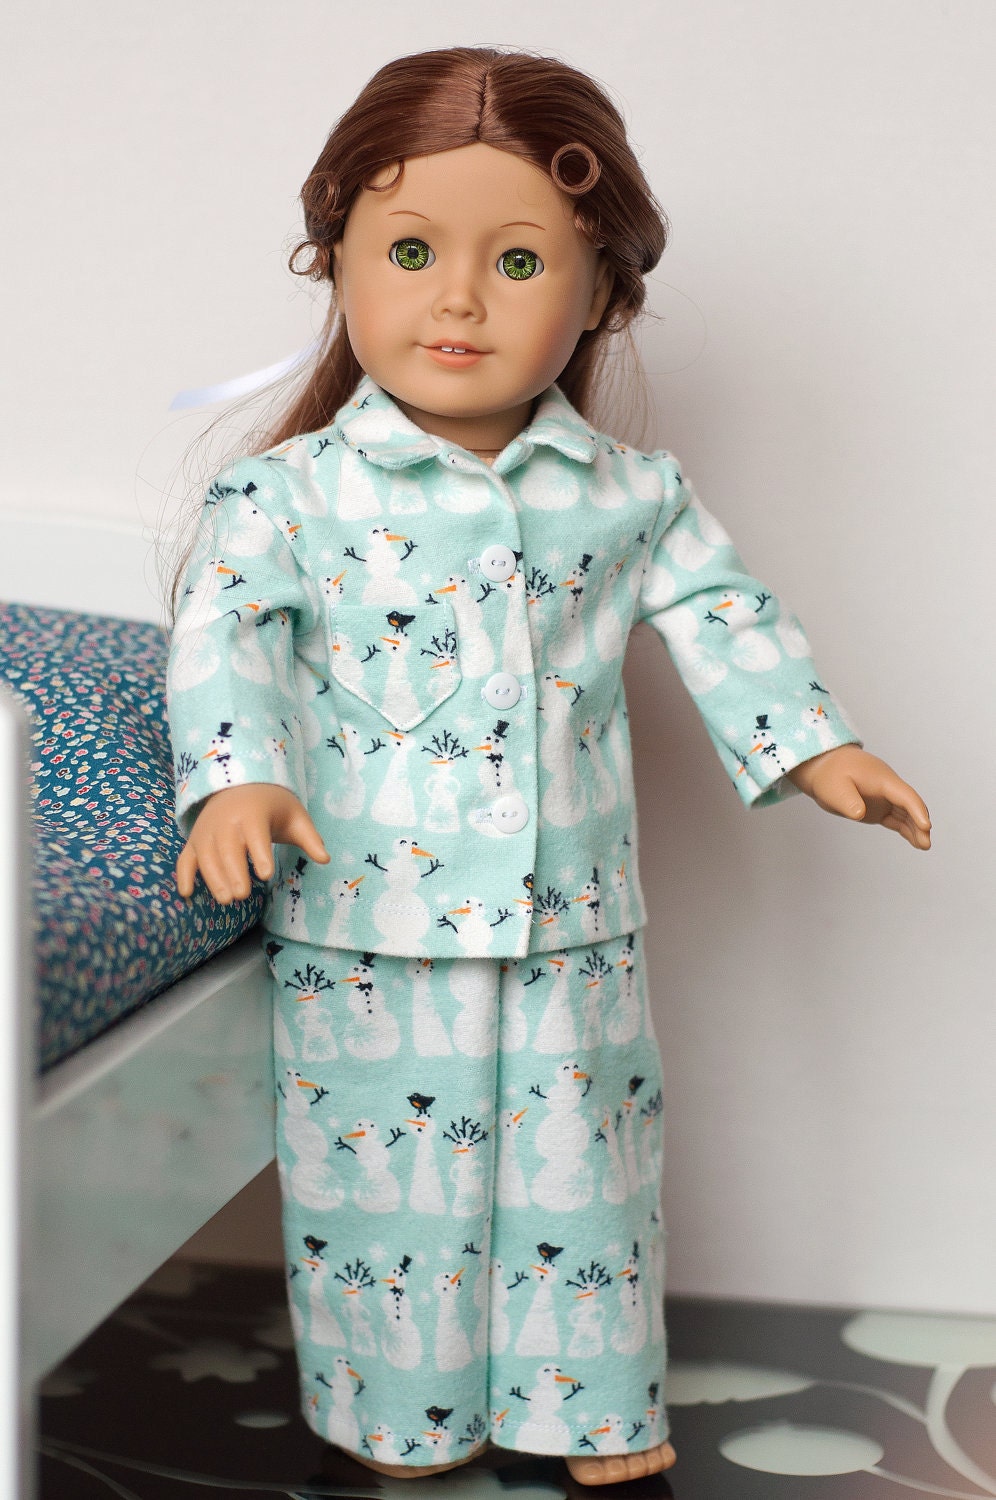 18 inch Doll Clothes: Snowman Pajamas for American Girl Dolls or other 18 Inch dolls